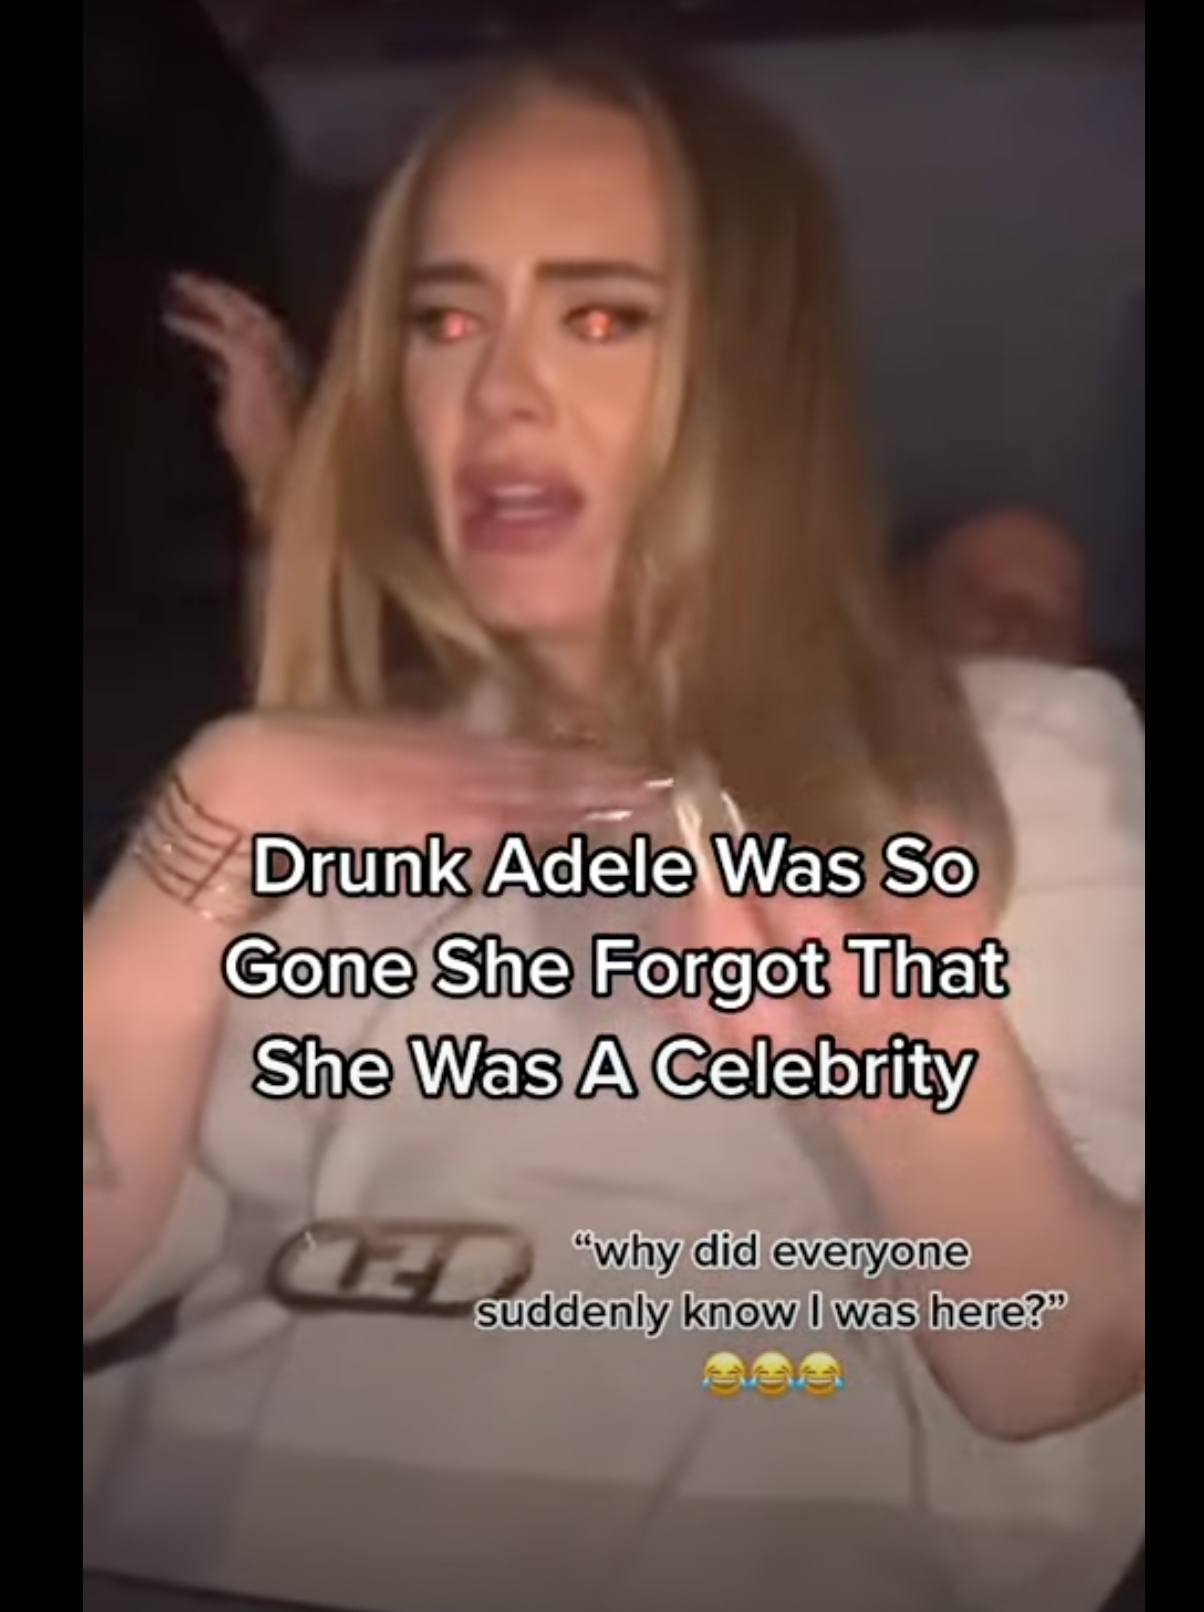 Adele Porn Captions - Adele Once Got 'So Drunk' She Forgot She Was Famous